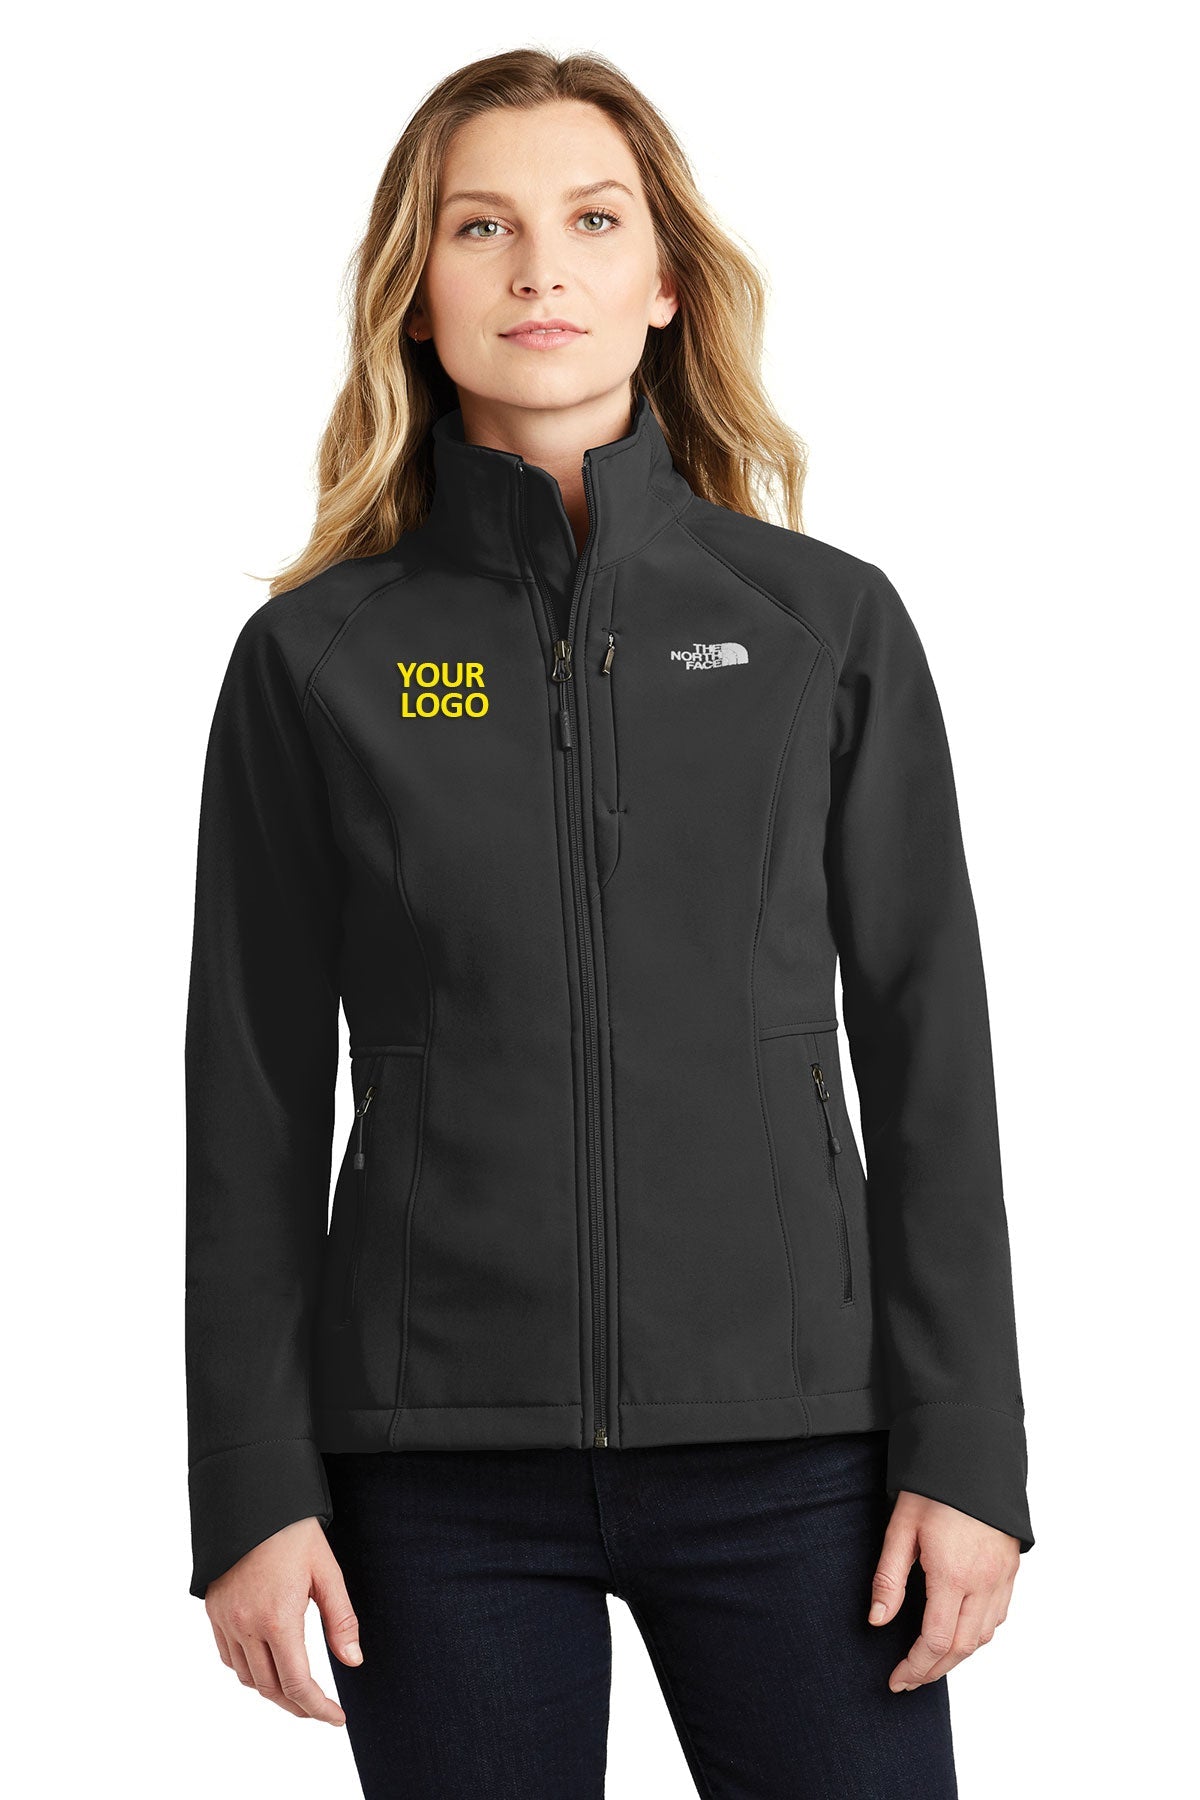 North Face Ladies Apex Barrier Soft Shell Jacket TNF Black